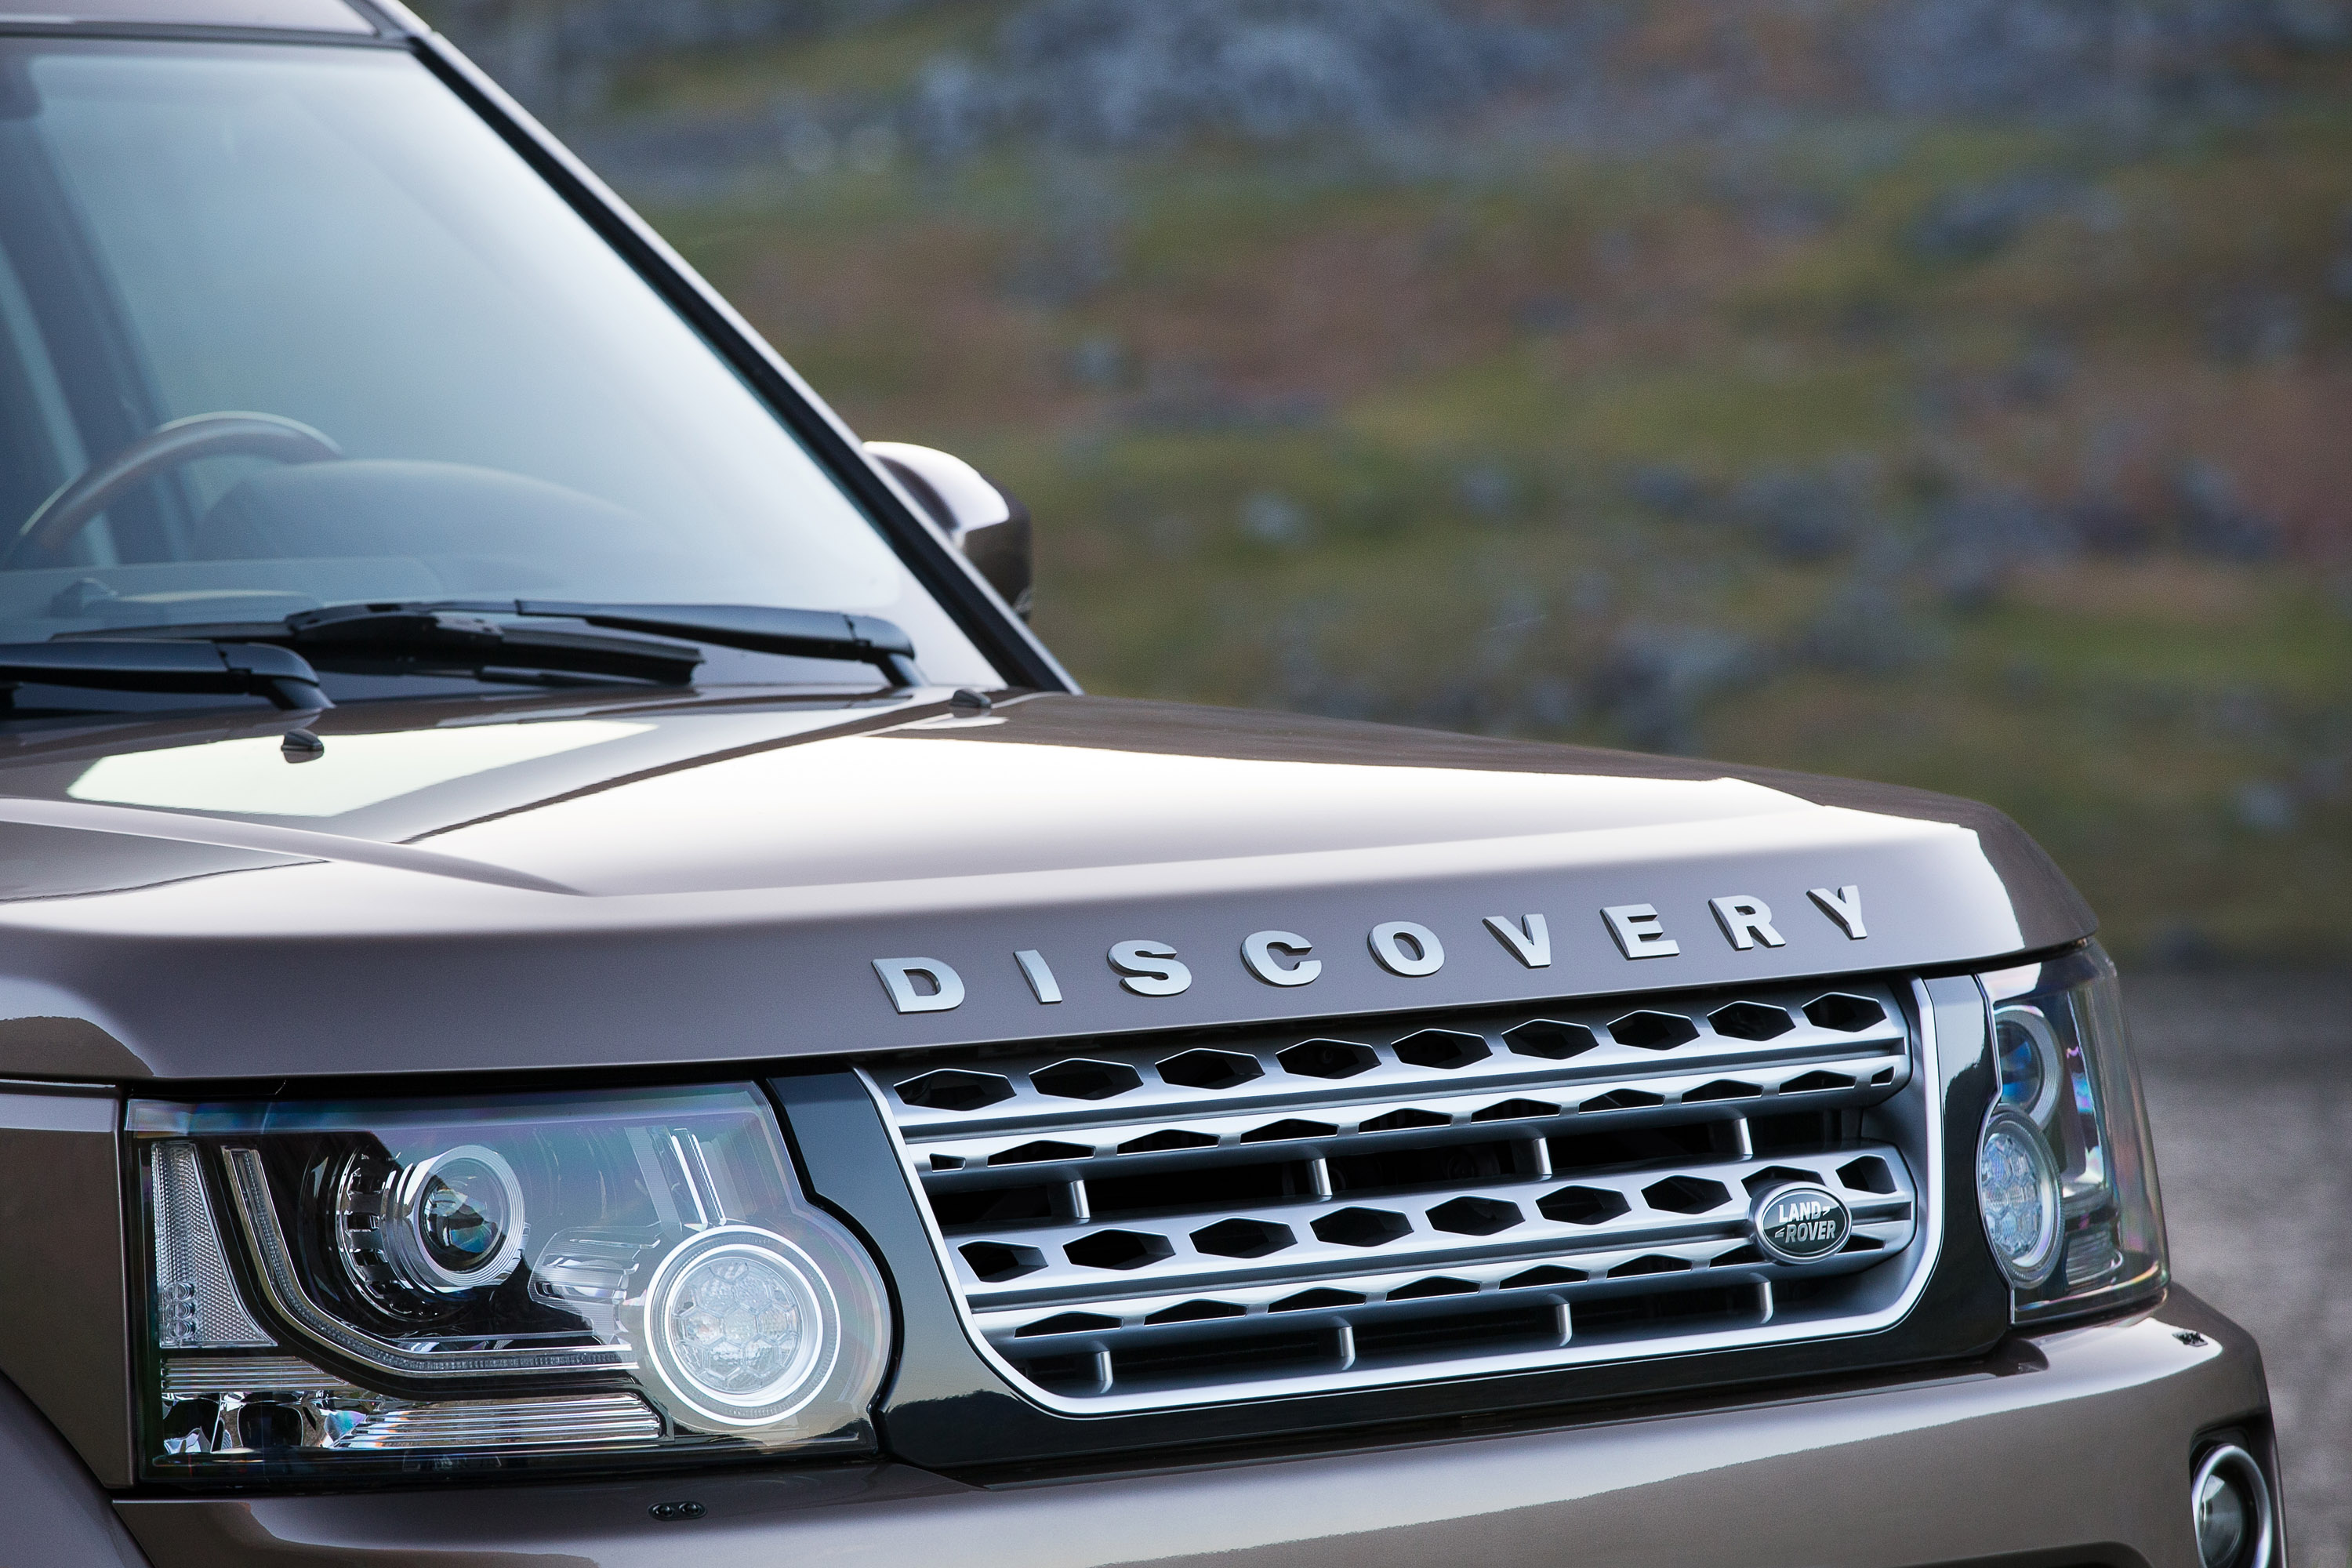 Дискавери б. Land Rover Discovery 4 2015. Ленд Ровер Дискавери 2015. Ленд Ровер 2015. Ленд Ровер Дискавери 4 2015 года.